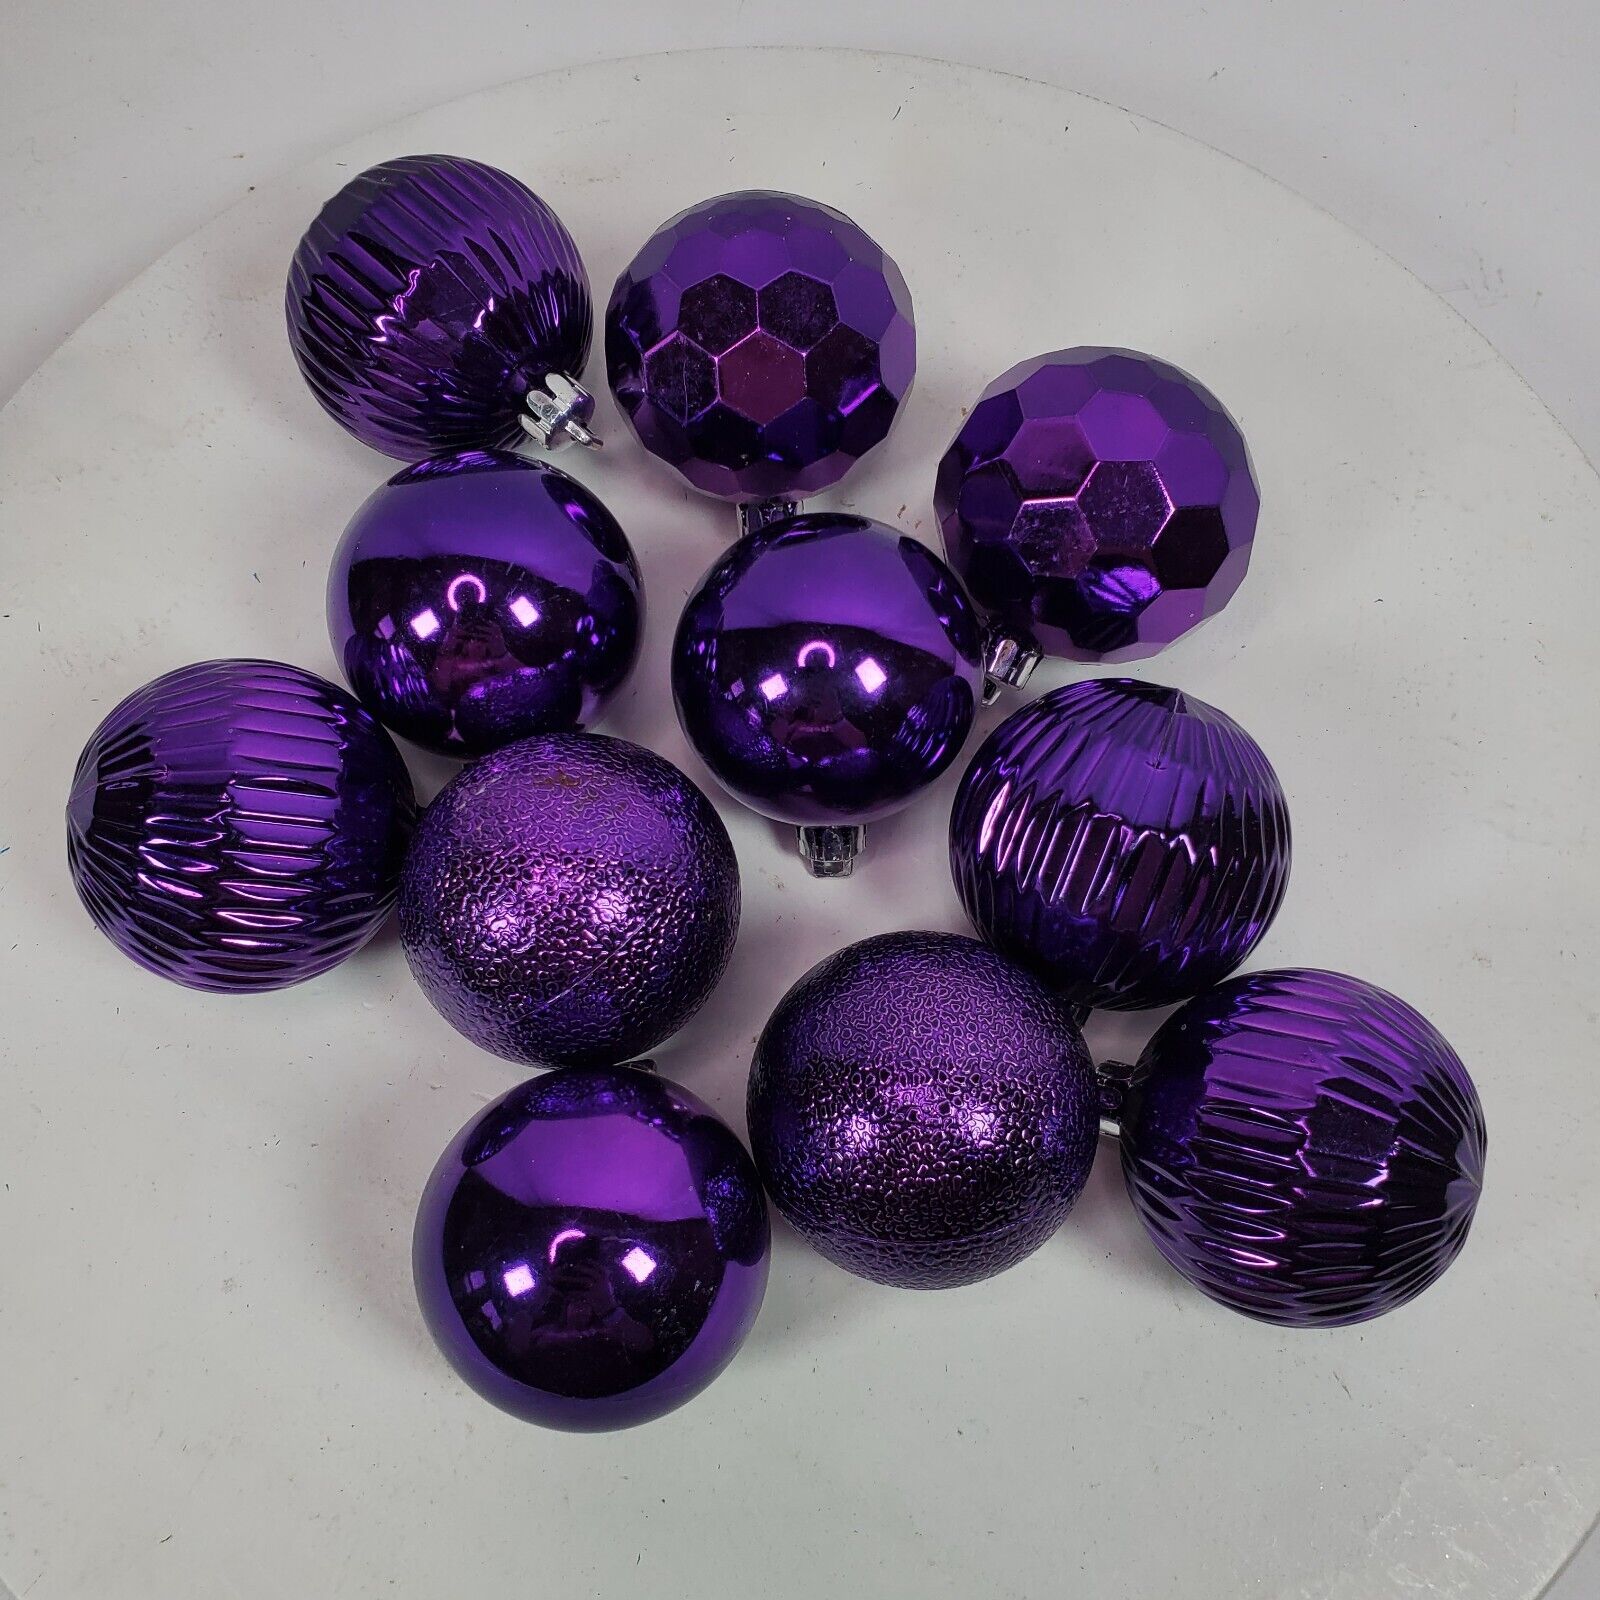 Vintage 1990s Purple Christmas Holiday Ball Ornaments 2.25 Inch LOT OF 11